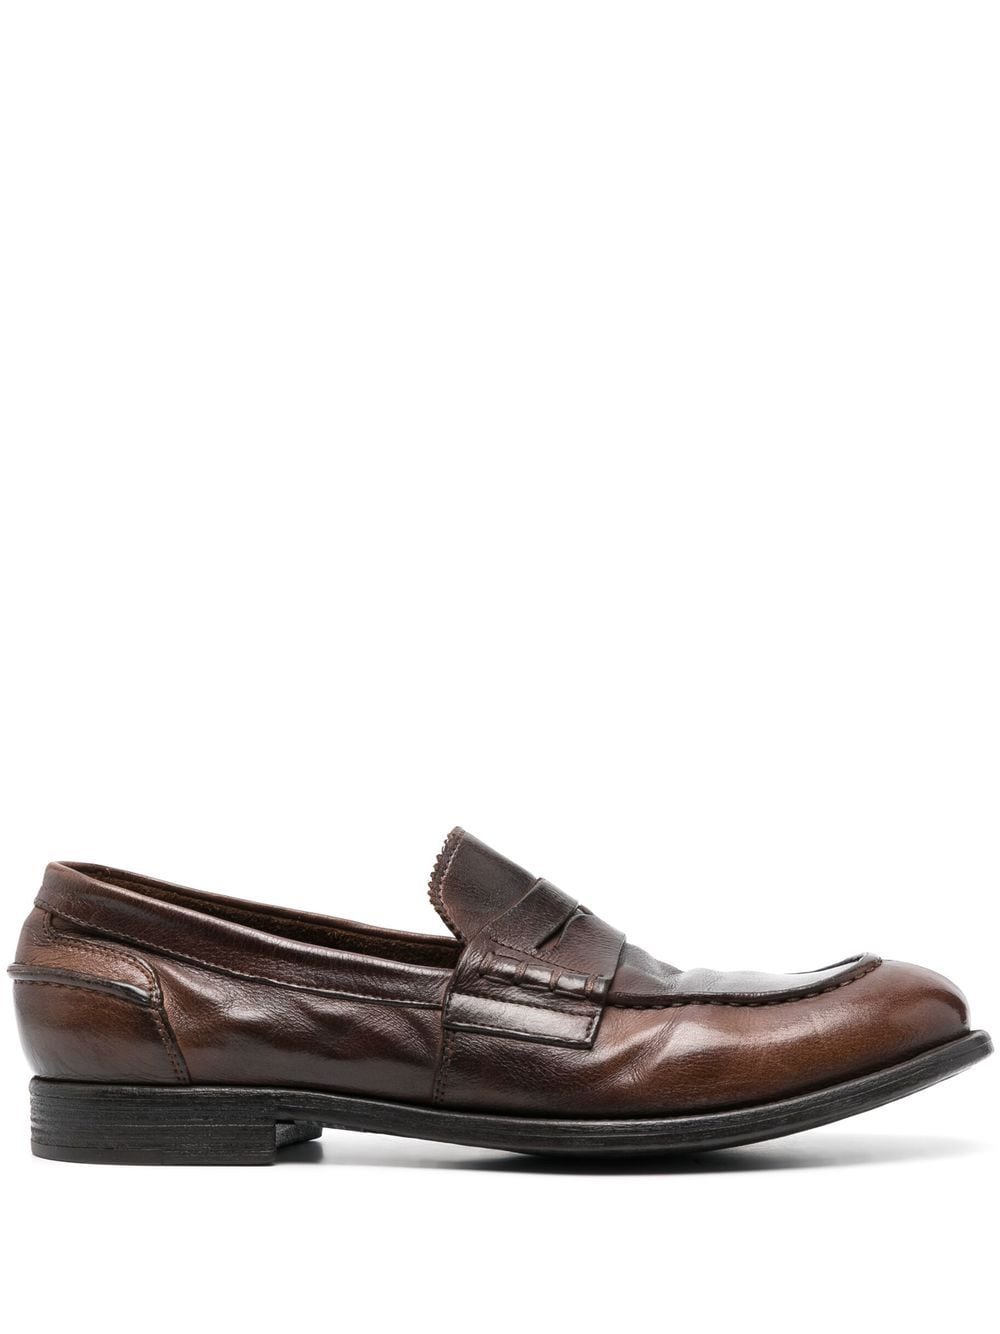 Officine Creative Chronicle leather Penny loafers - Brown von Officine Creative